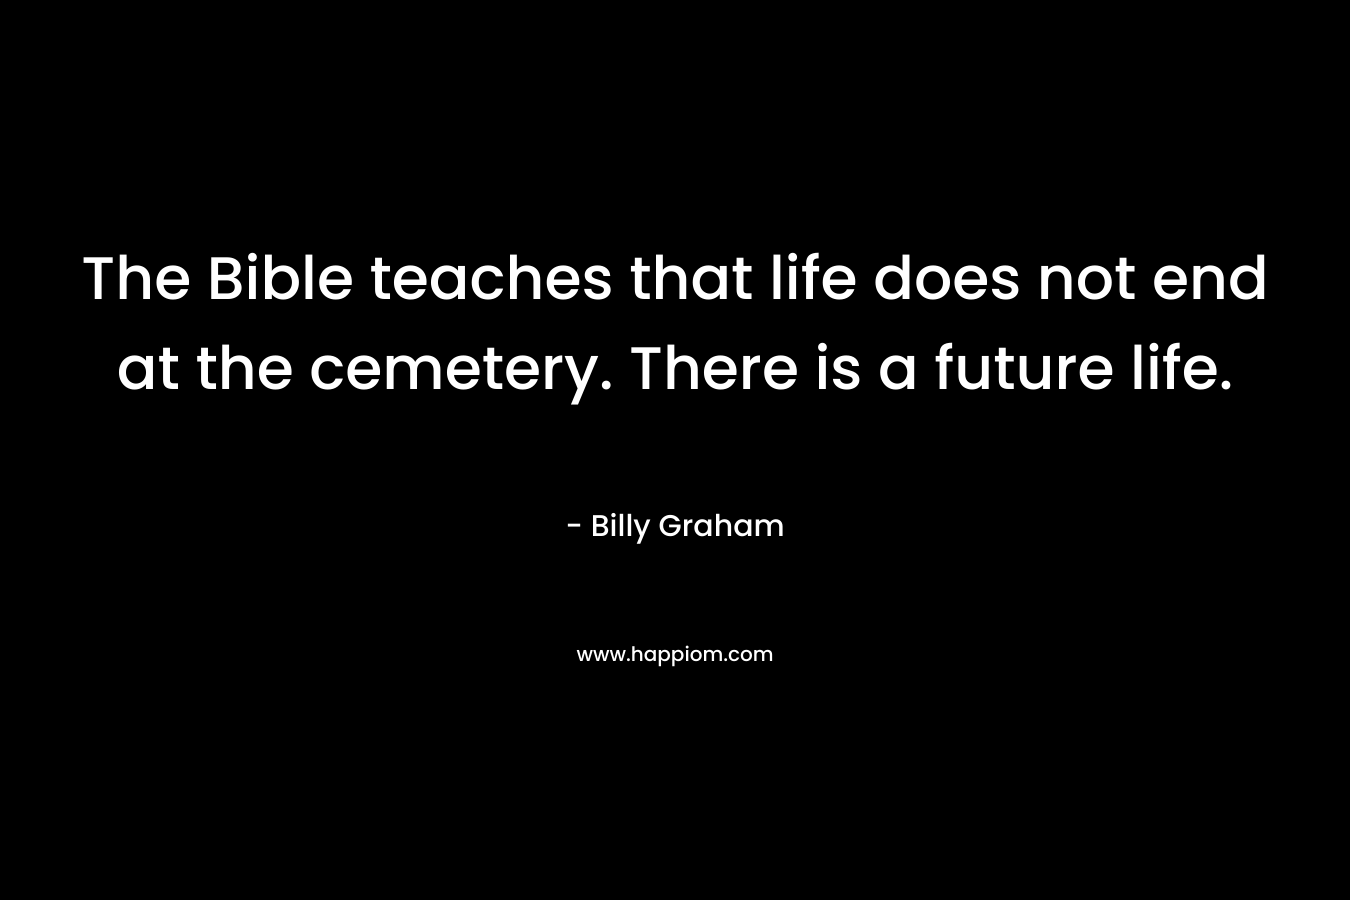 The Bible teaches that life does not end at the cemetery. There is a future life.